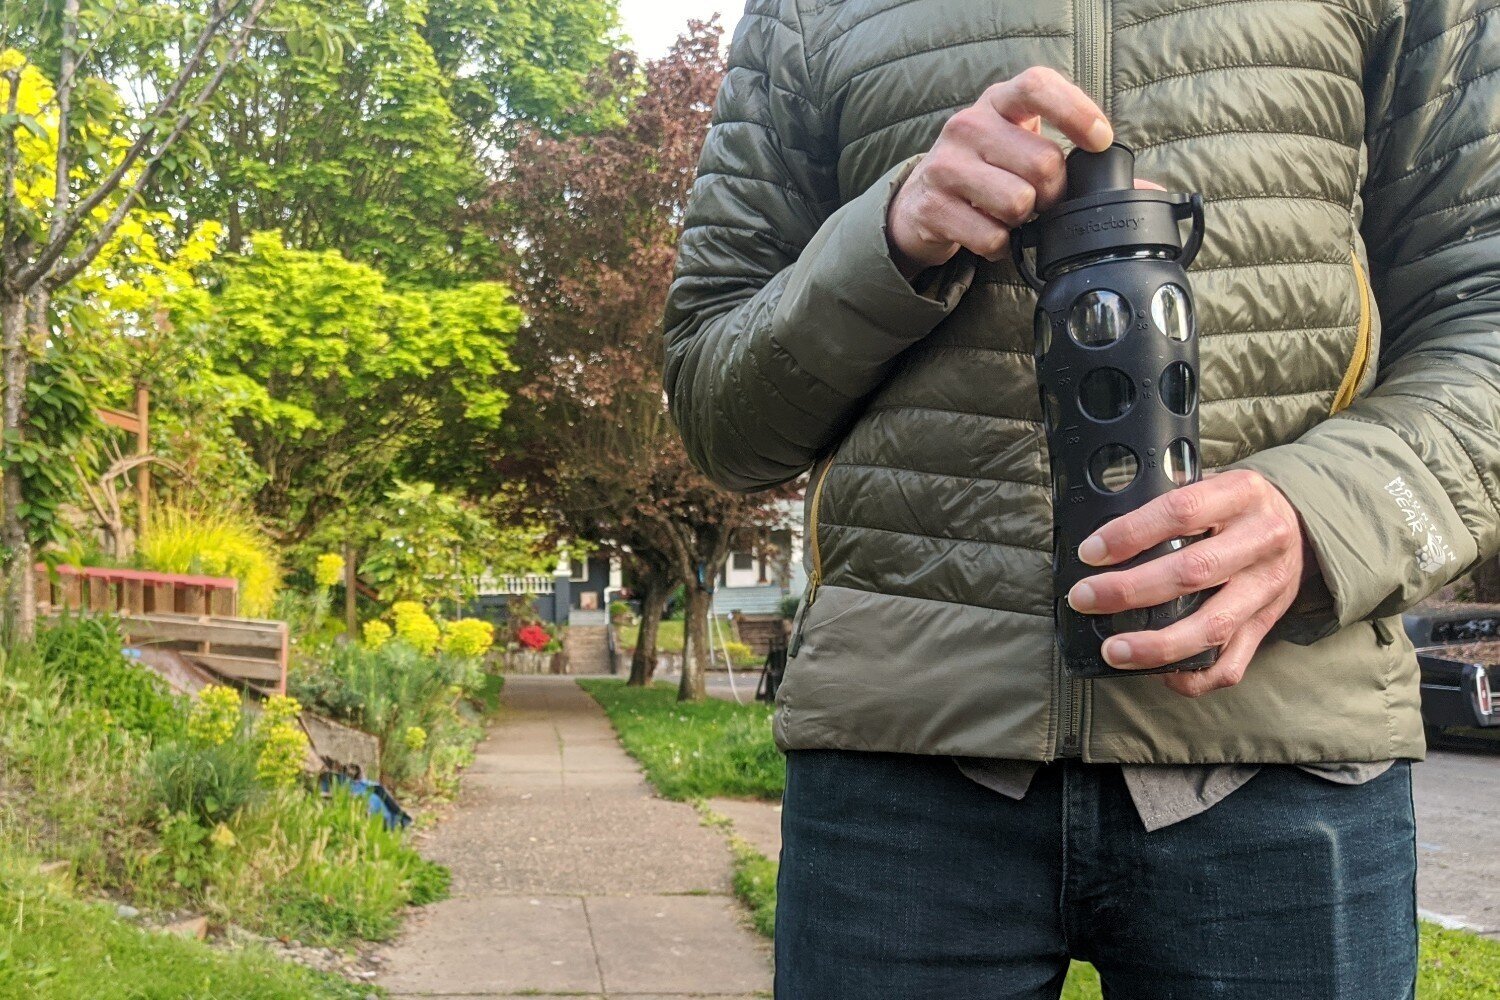 We prefer the Active Cap for the Lifefactory Glass Water Bottle, because it’s easy to drink from on the go.